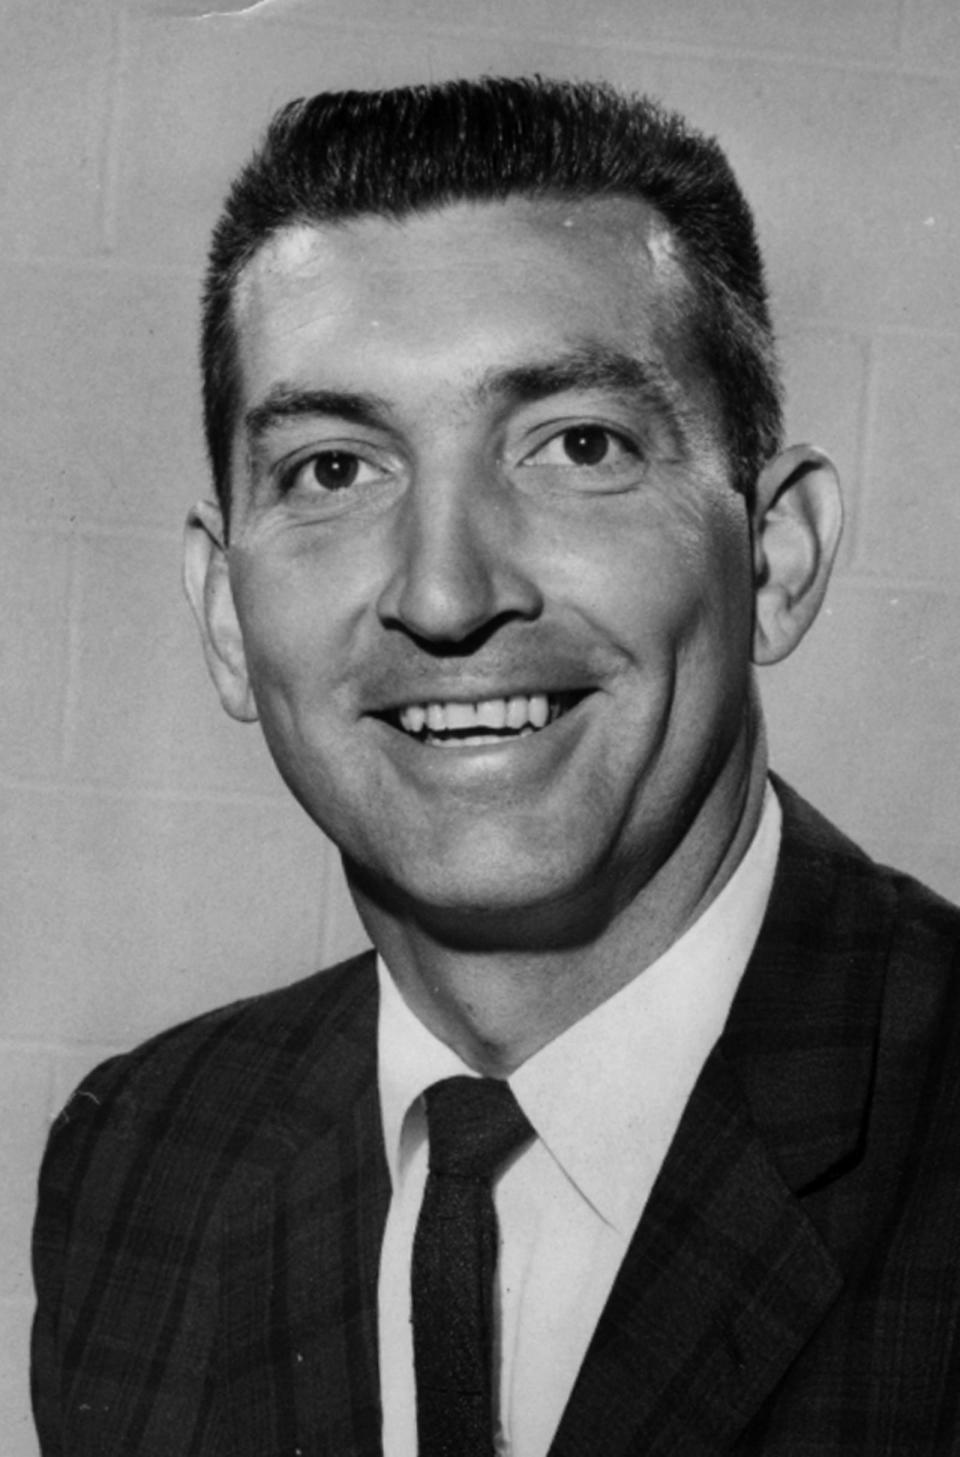 Charley Wolf was born in Covington, Kentucky, in 1926. He graduated from St. Xavier High School in 1944, served in the Navy, and went on to become a professional basketball coach for the Cincinnati Royals and Detroit Pistons. Wolf died on Saturday, Nov. 26, 2022, at the age of 96.